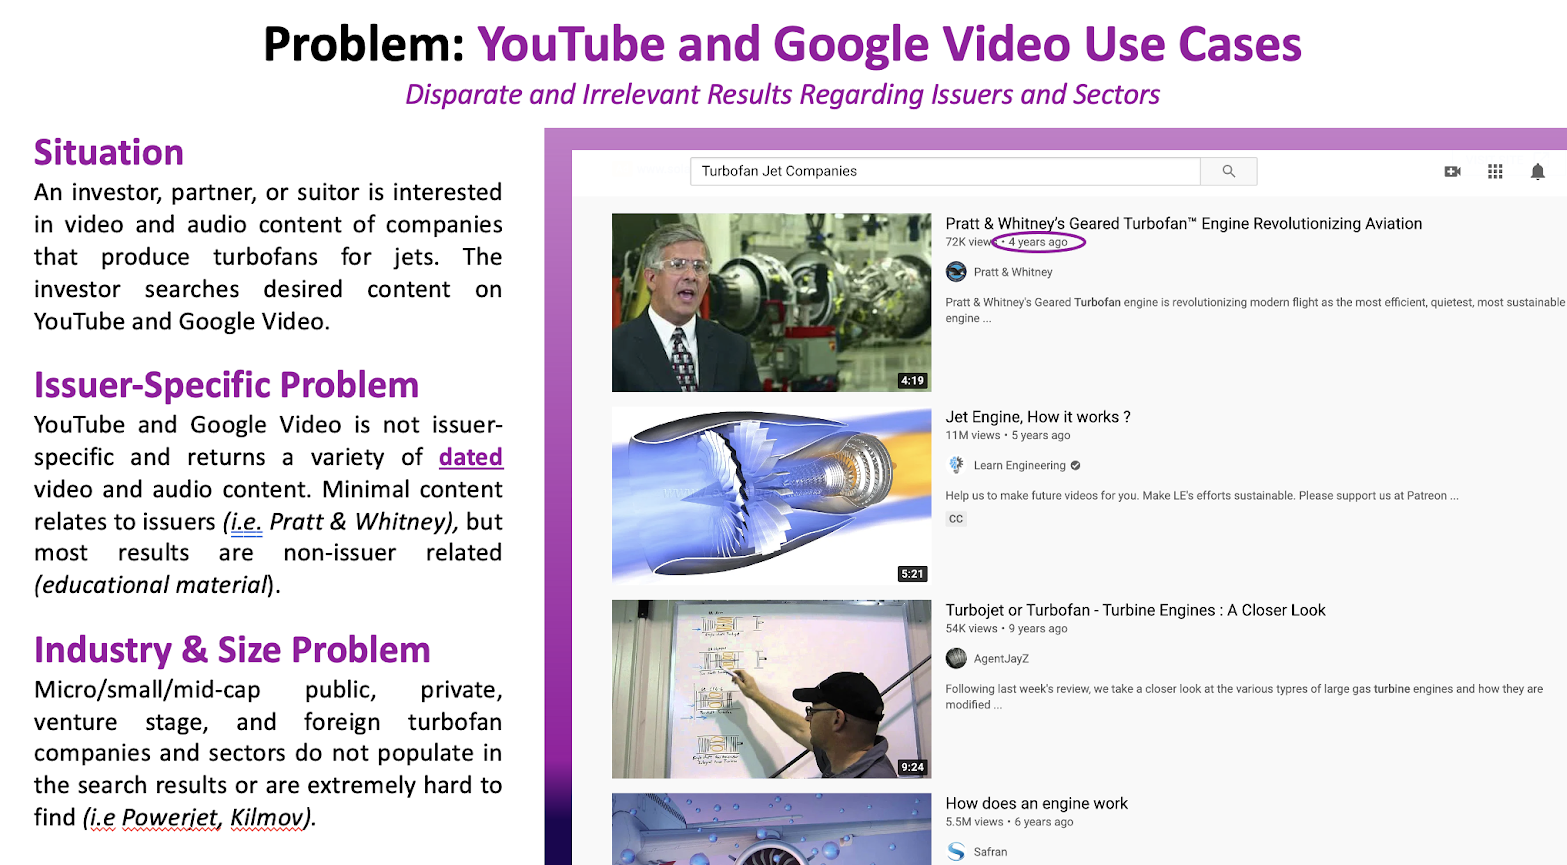 YouTube and Google Video Use Cases